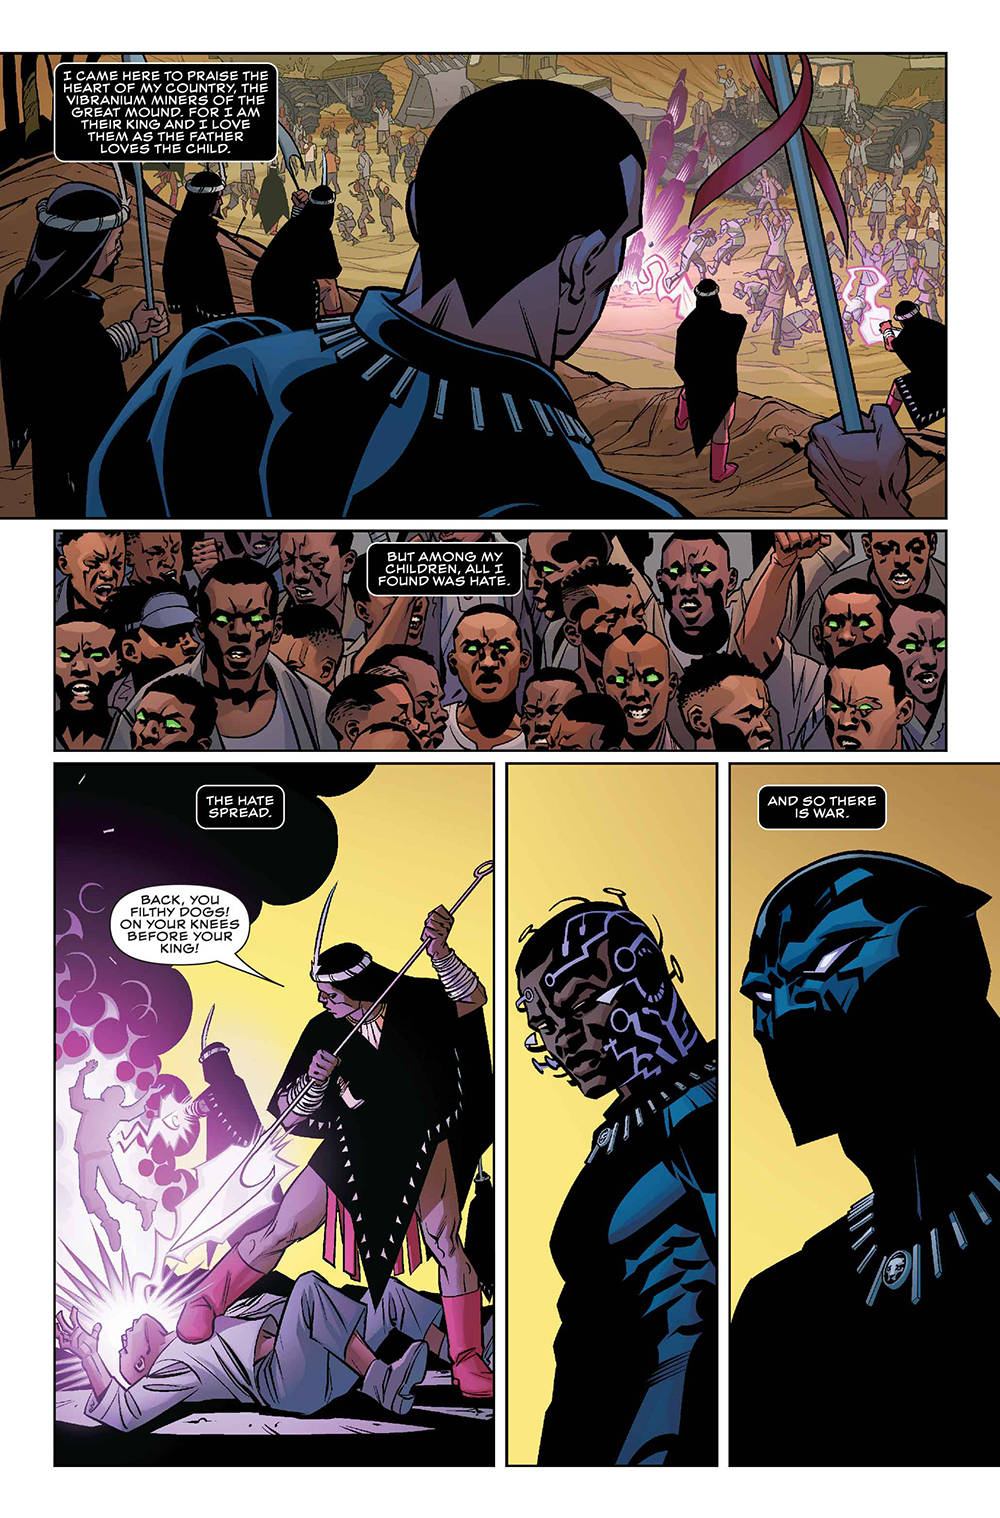 Where Does Black Panther Fall On The Prose To Comics Learning Curve